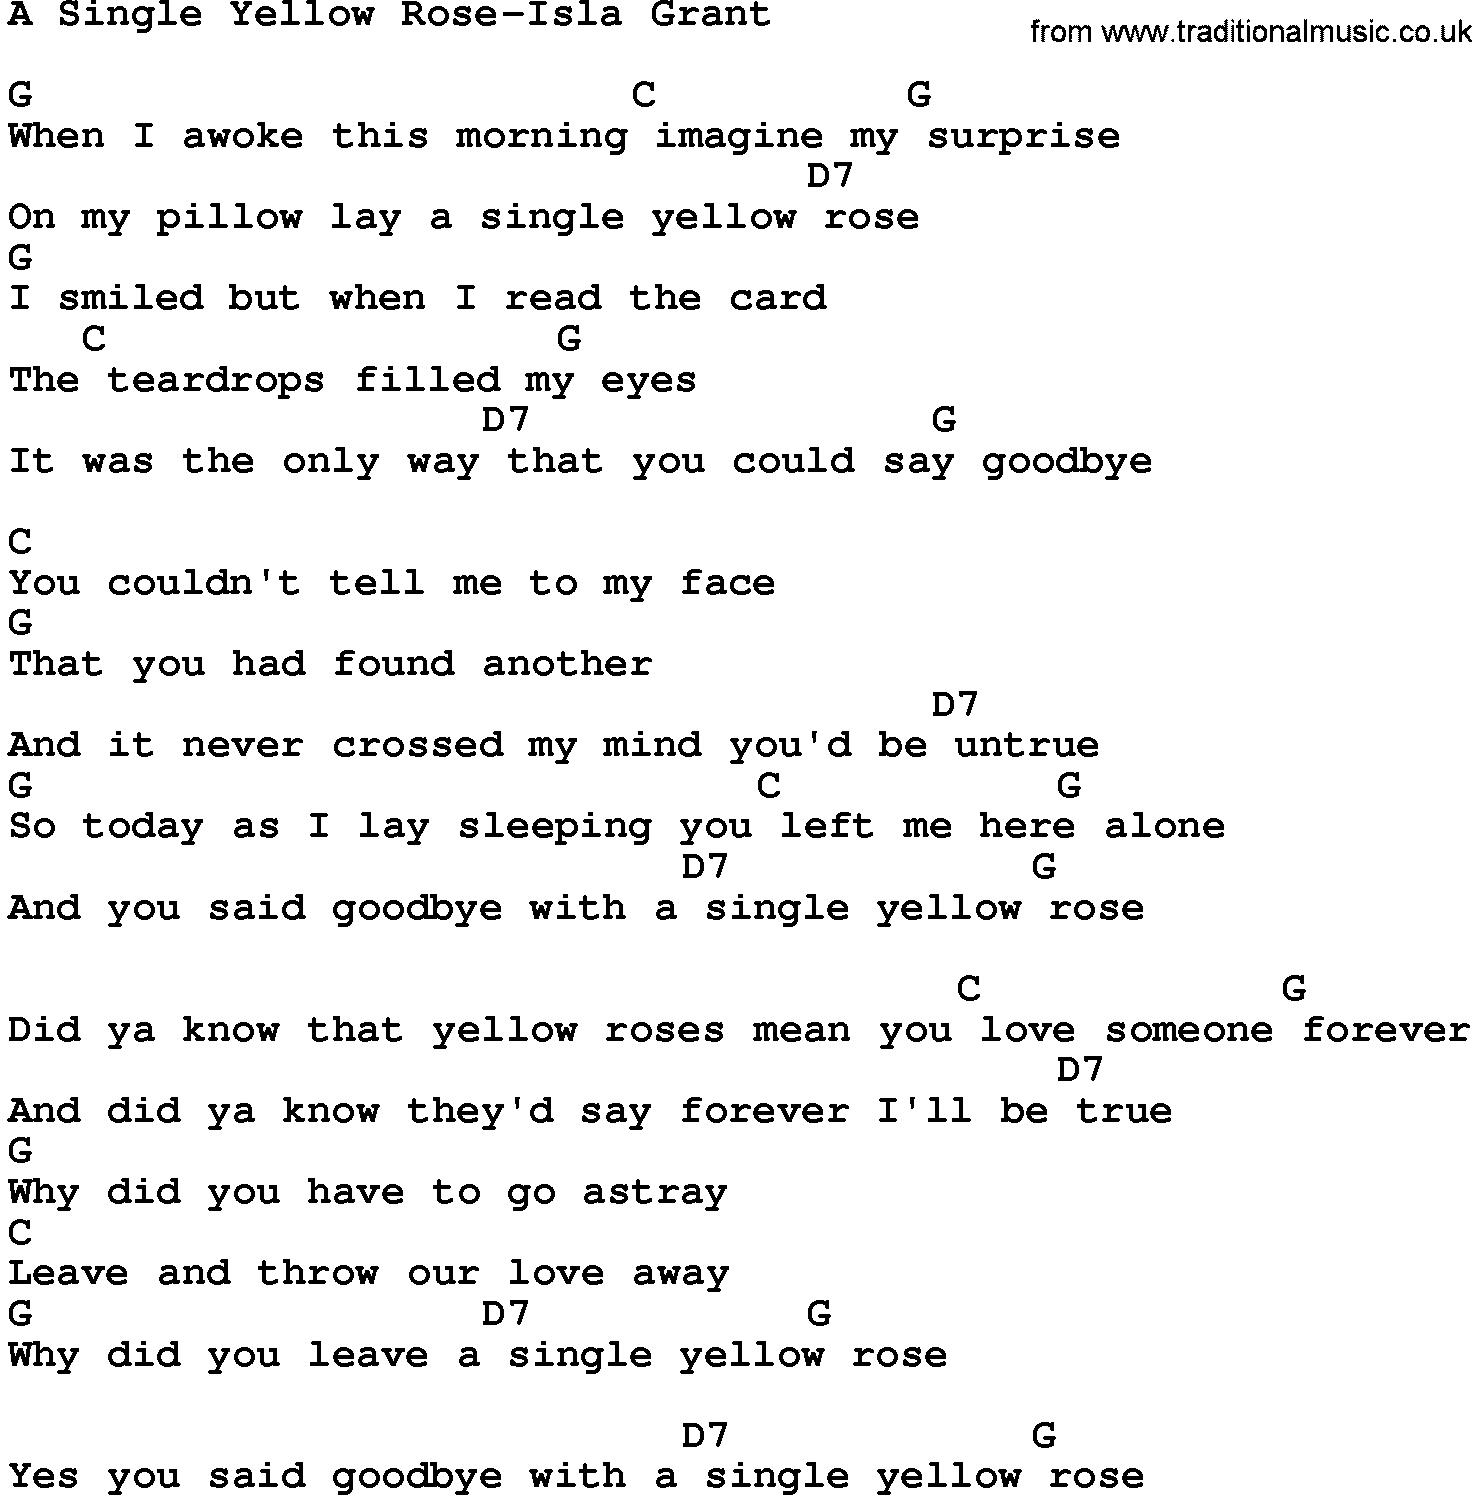 Country music song: A Single Yellow Rose-Isla Grant lyrics and chords